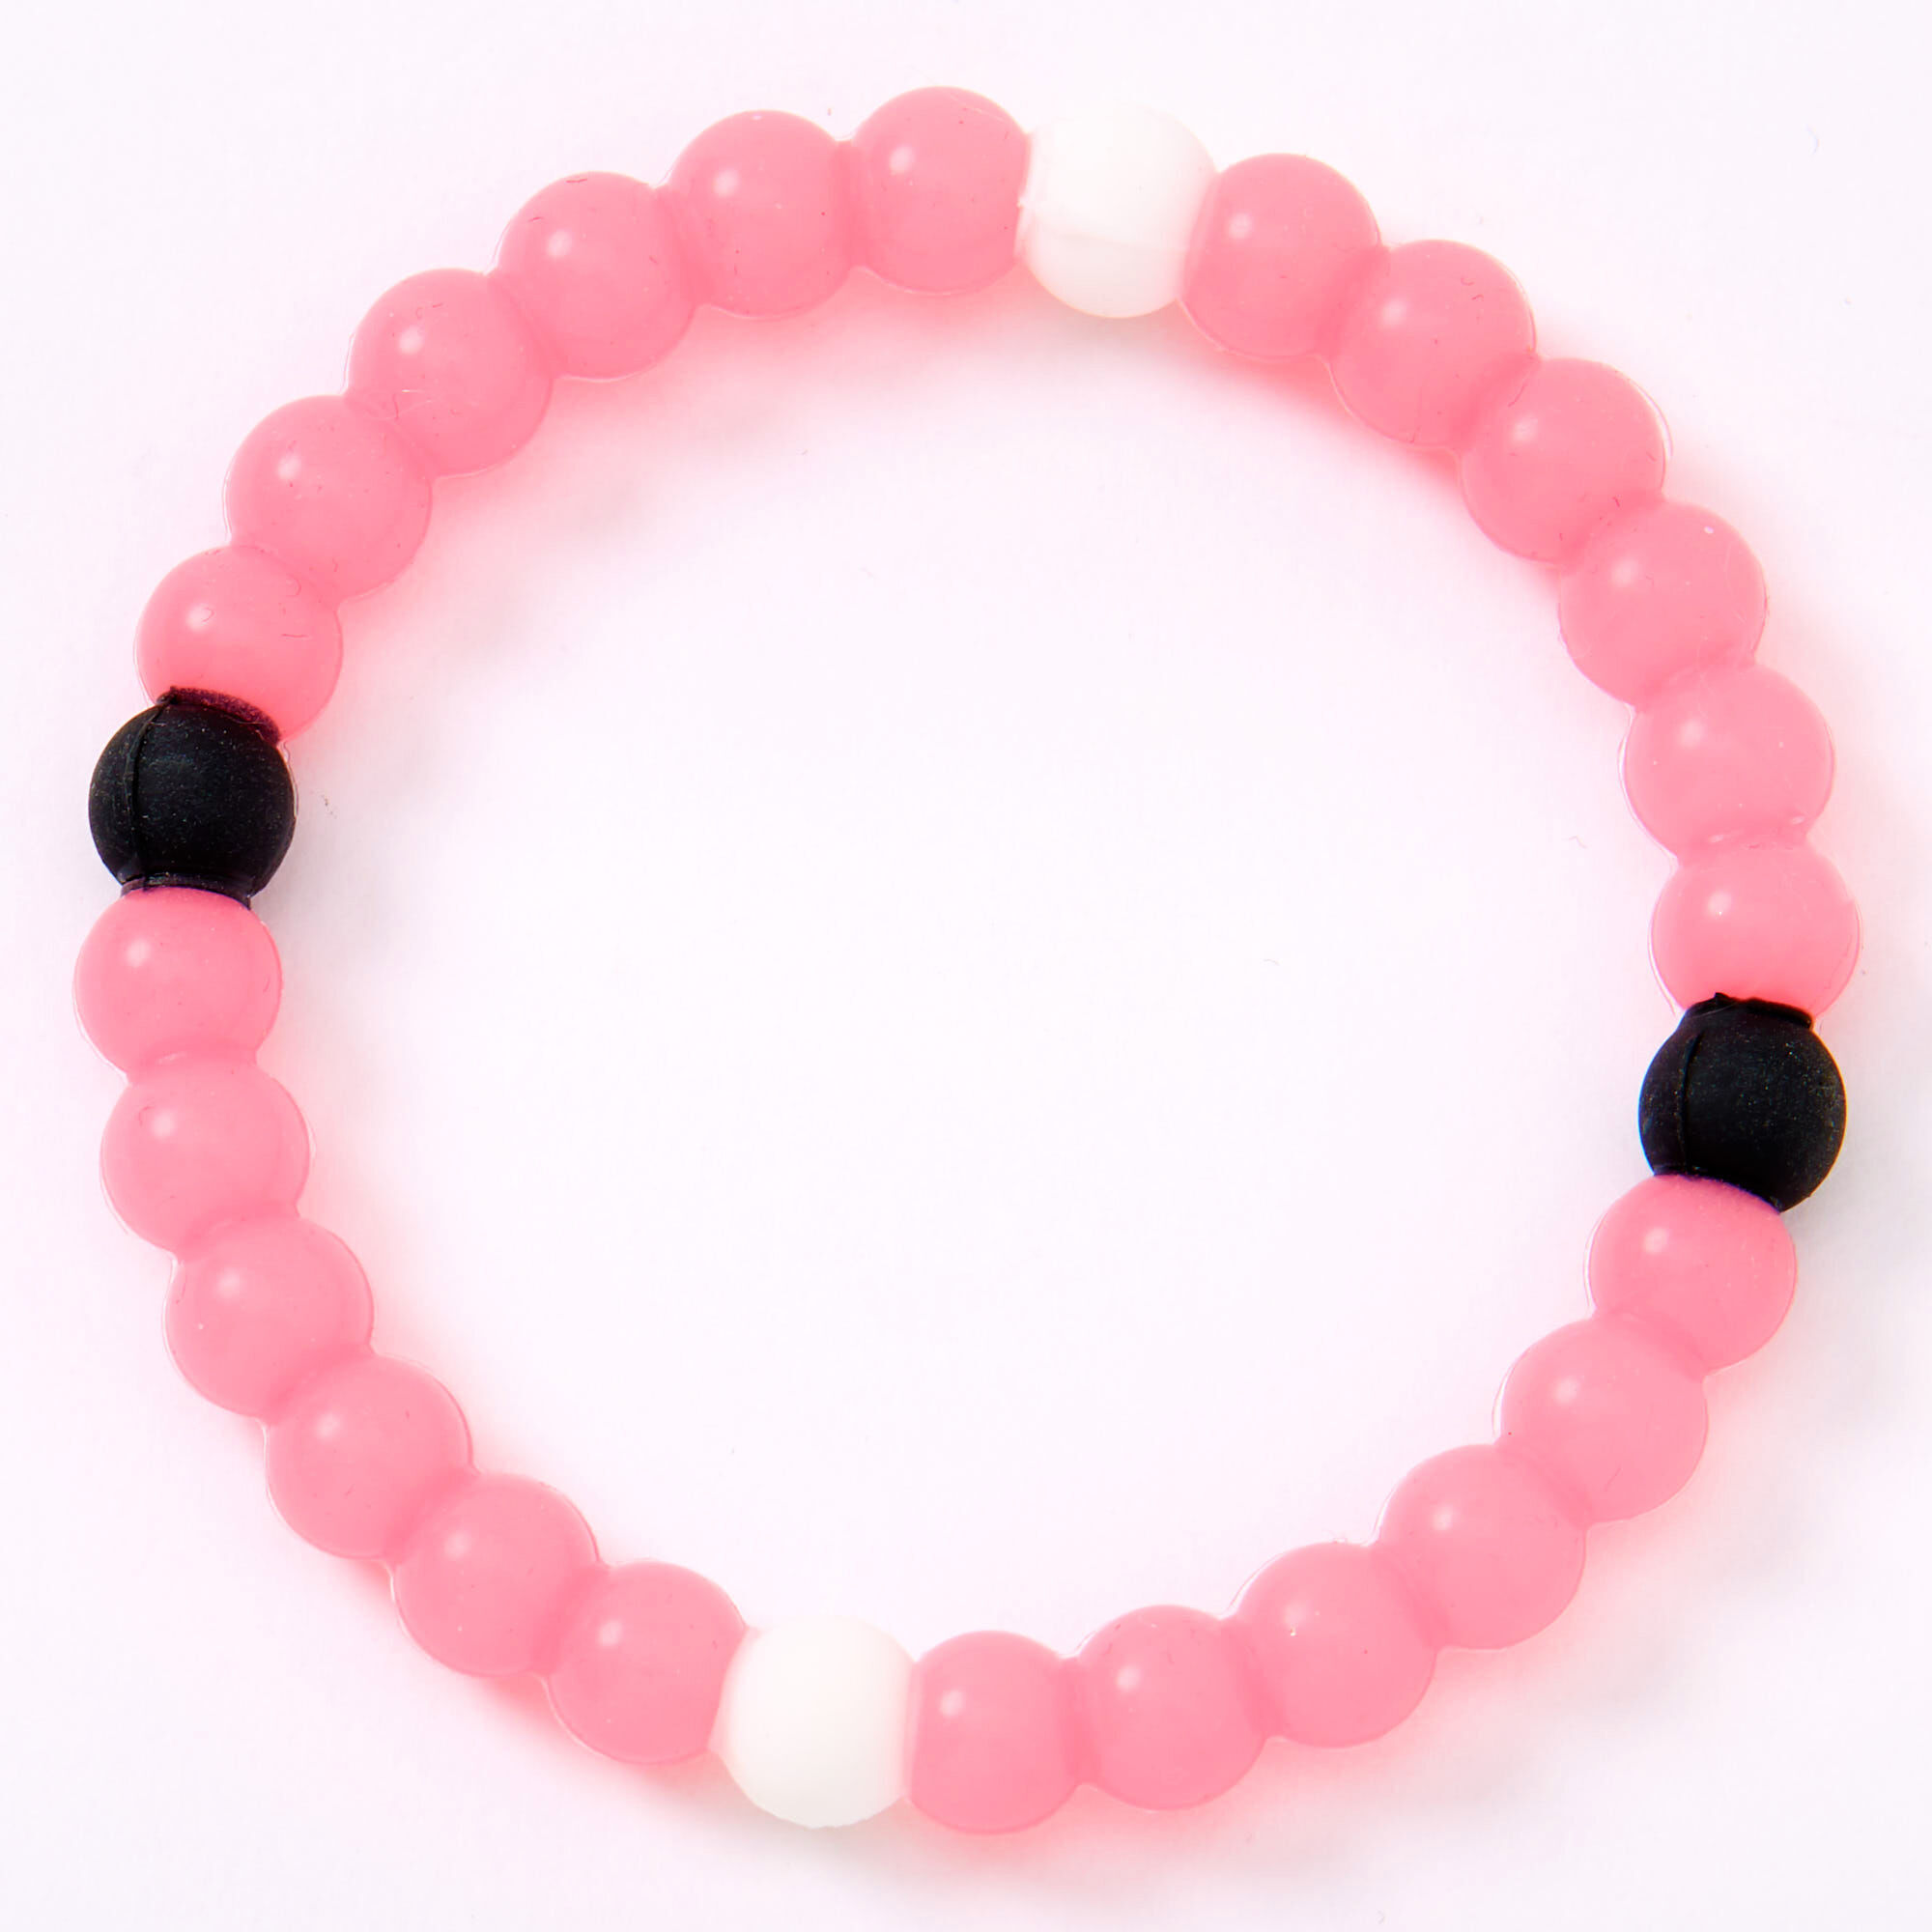 Lokai Breast Cancer Cause Collection Bracelet Pink Small & Medium Sizes  | eBay